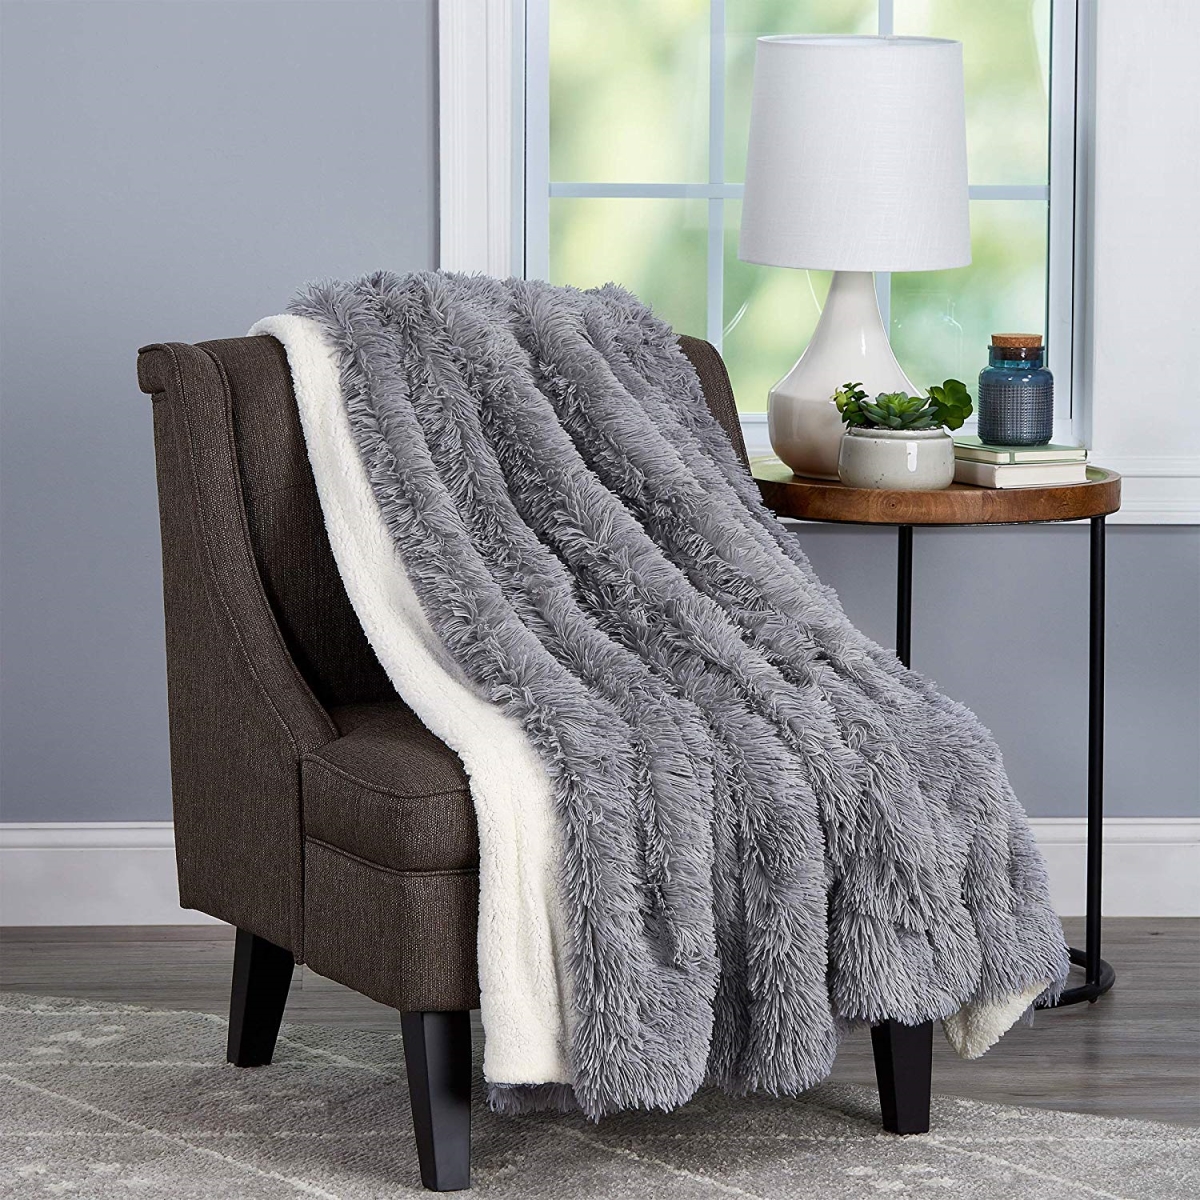 66a-34977 Soft Hypoallergenic Long Pile Faux Rabbit Fur Blanket With Sherpa Back For Couch Bed Throw Luxurious, 60 X 70 In. - Pewter